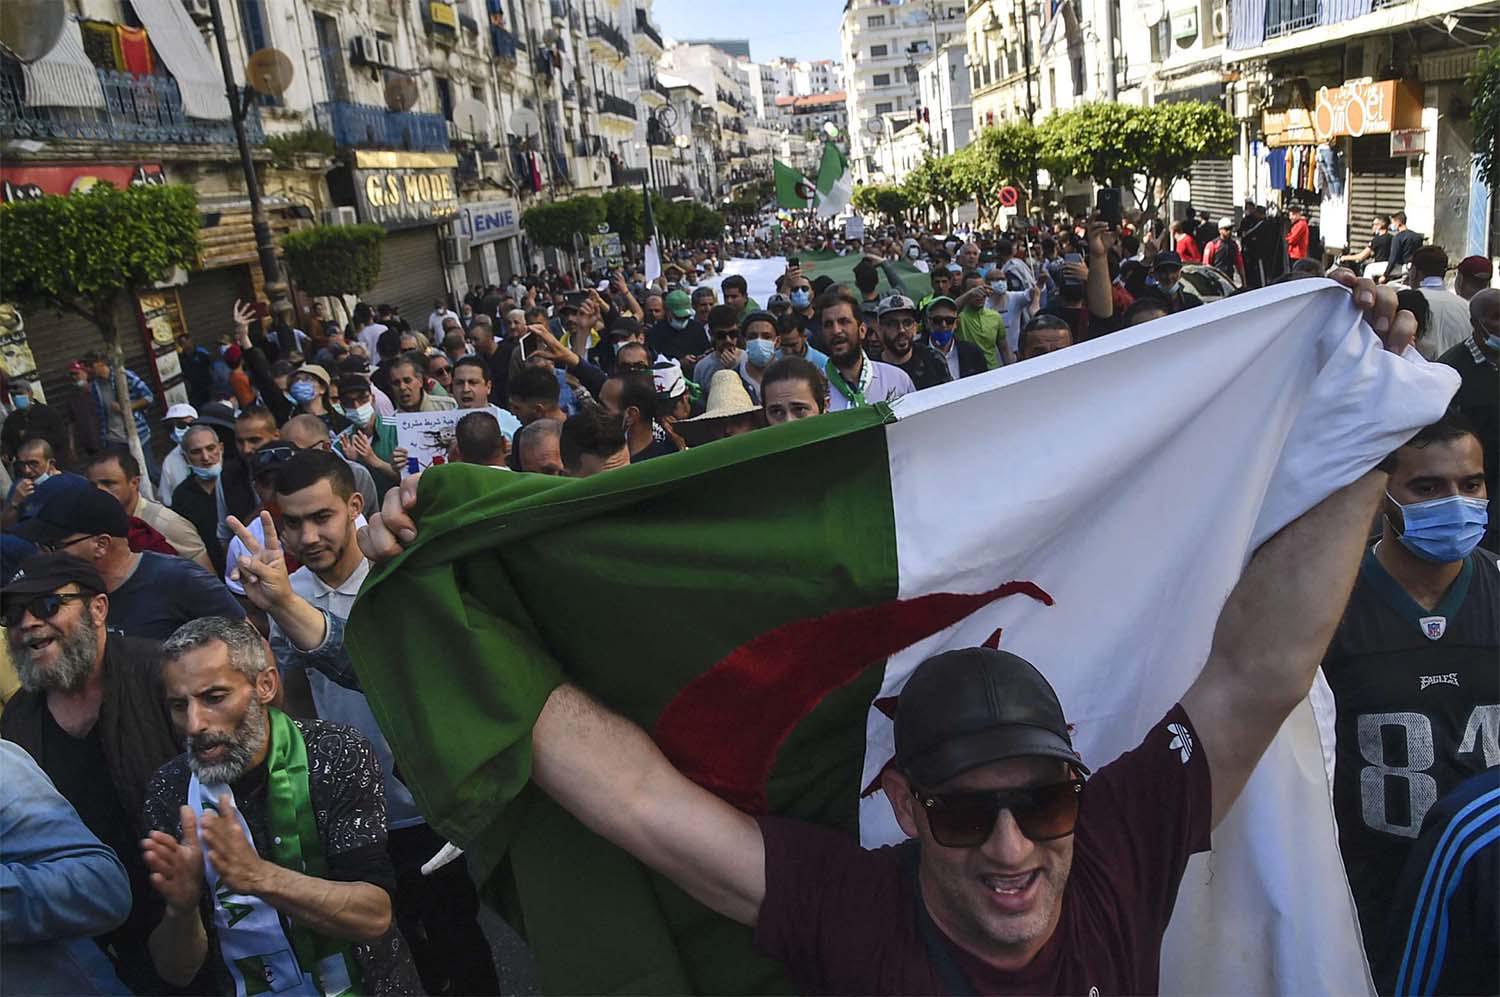 Algerians continue to demand a more thorough purge of the ruling elite